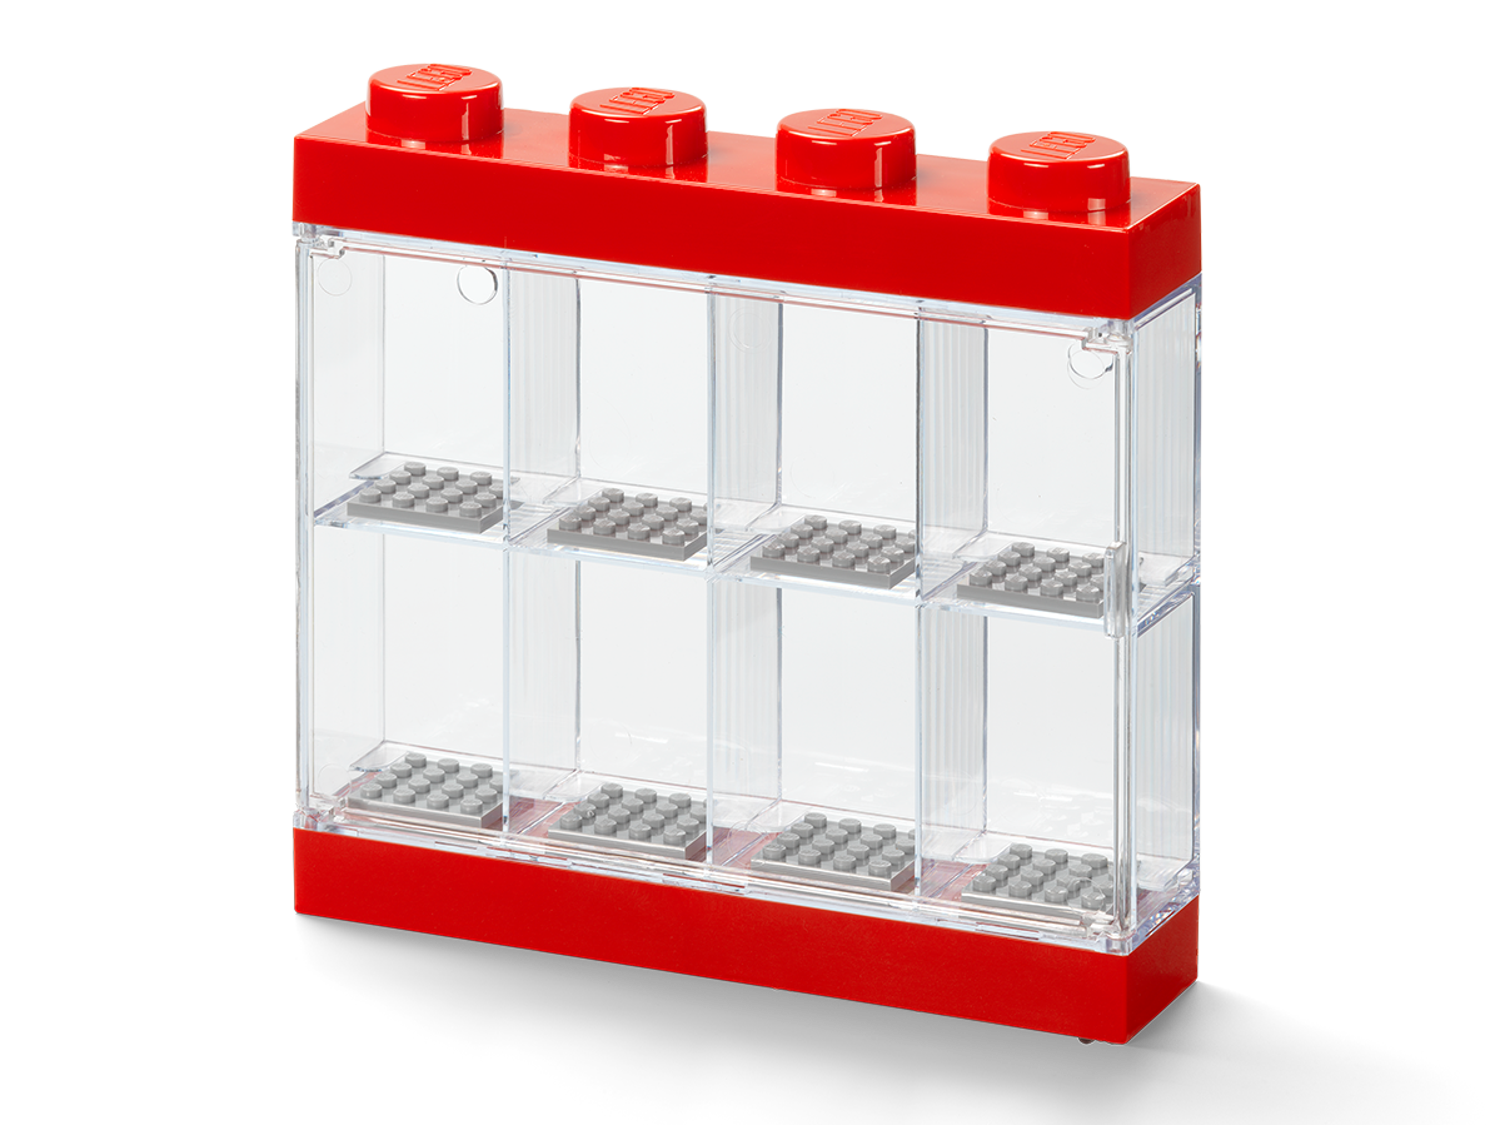 LEGO Red 8-Minifigure Display Case